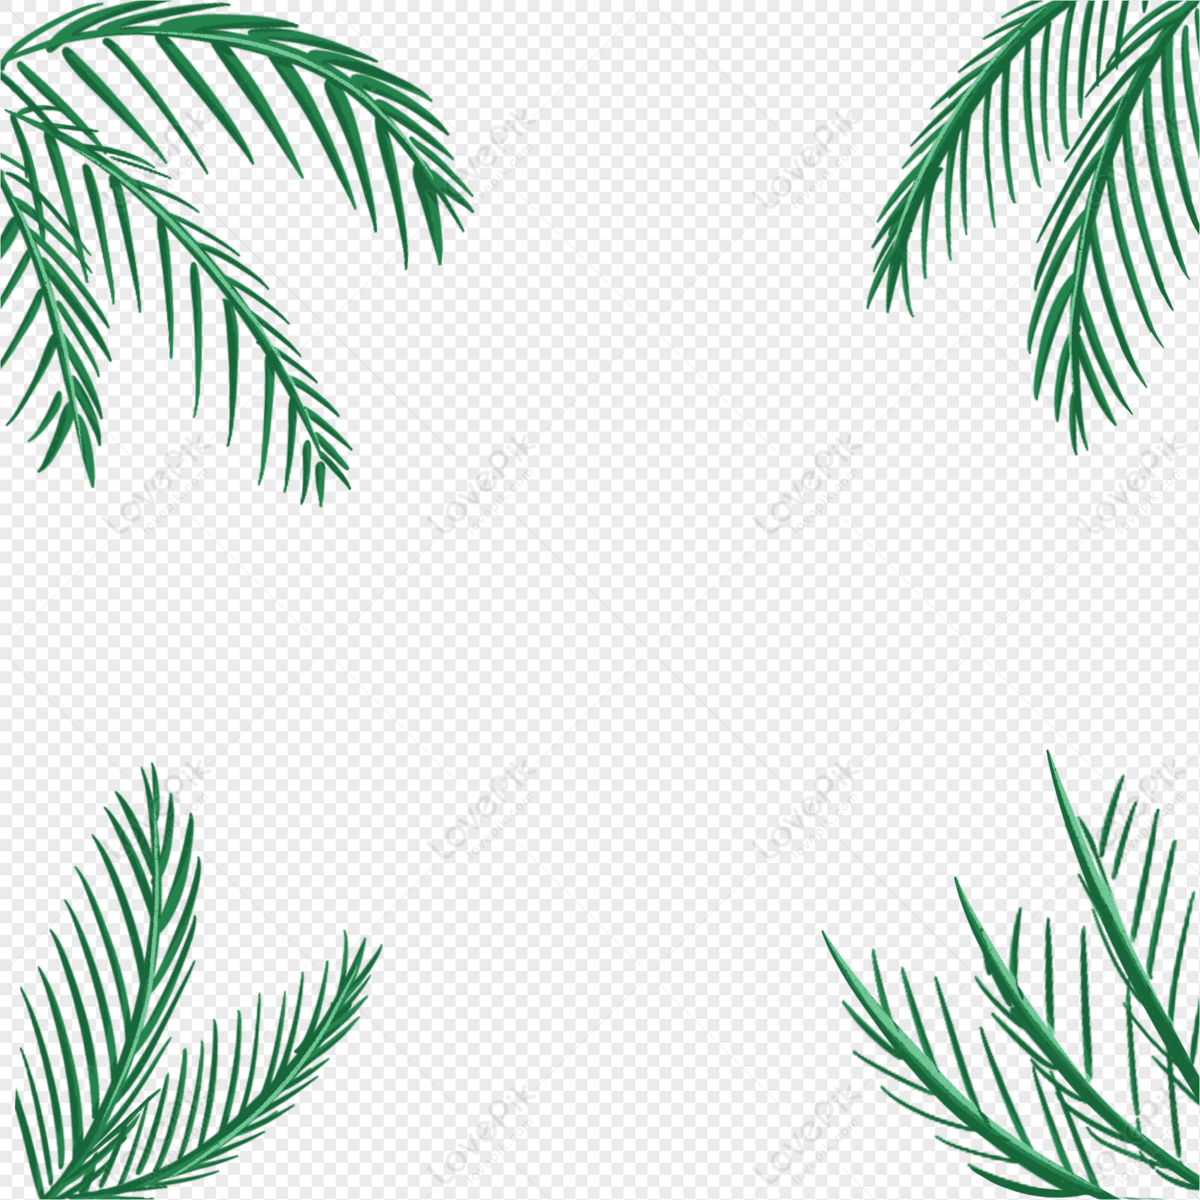 Coconut Leaves Border PNG Hd Transparent Image And Clipart Image For Free  Download - Lovepik | 401440654